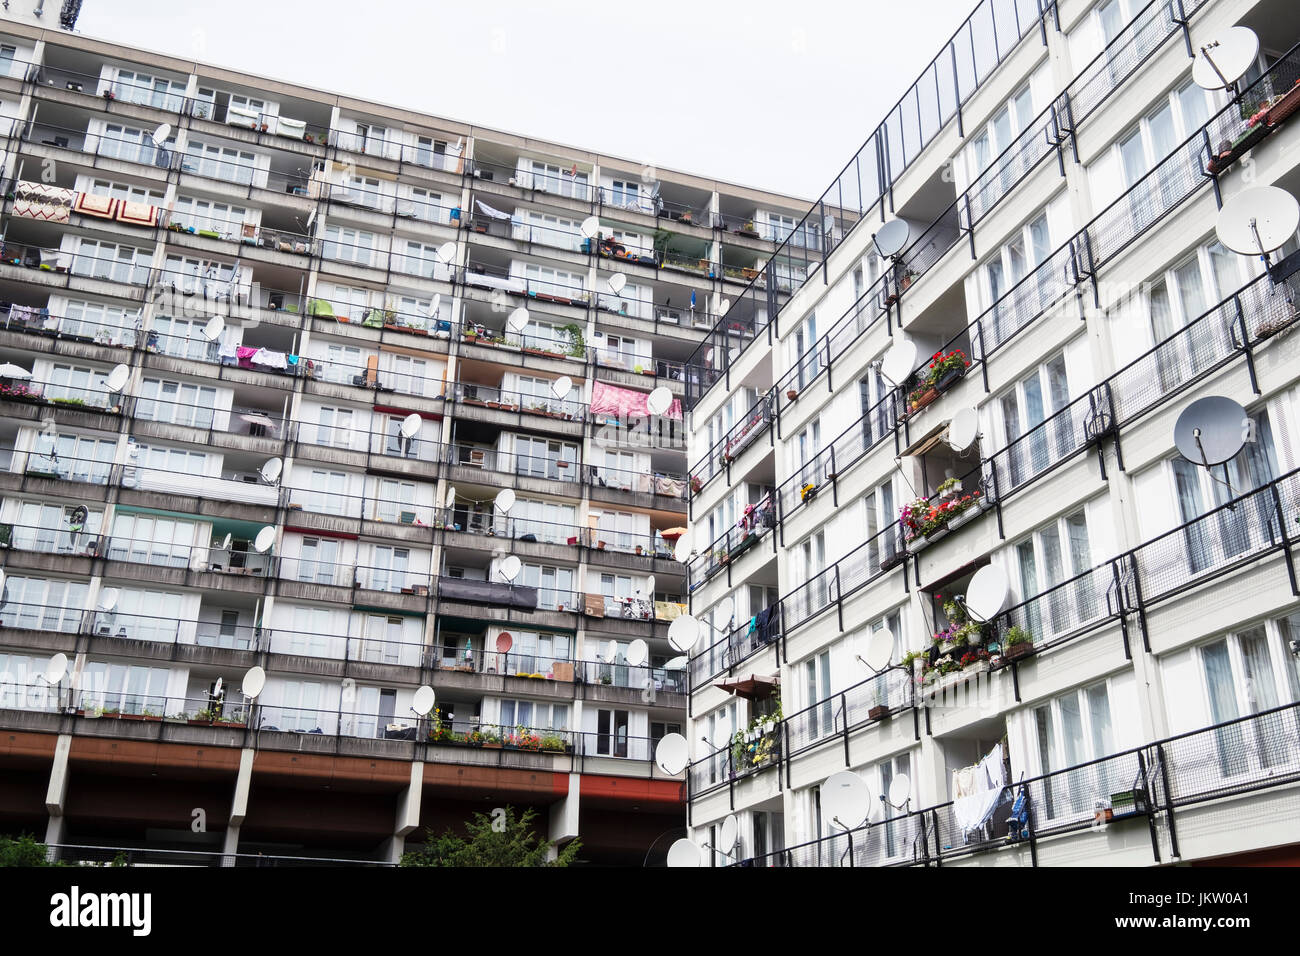 Social housing apartment blocks at Pallasseum on Pallastrasse in Schoeneberg district of Berlin, Germany. Stock Photo